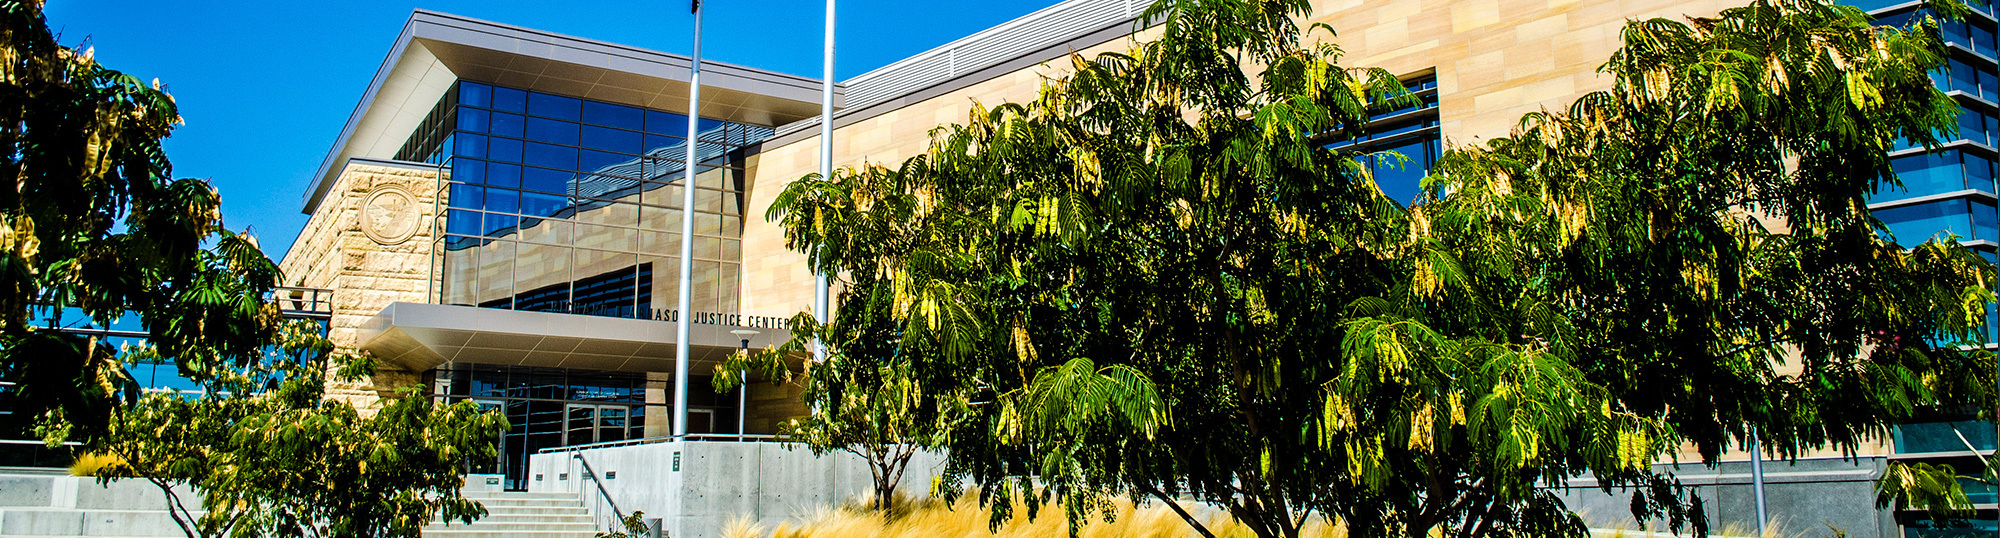 Pittsburg Superior Court (E. Contra Costa Courthouse) Alumawall